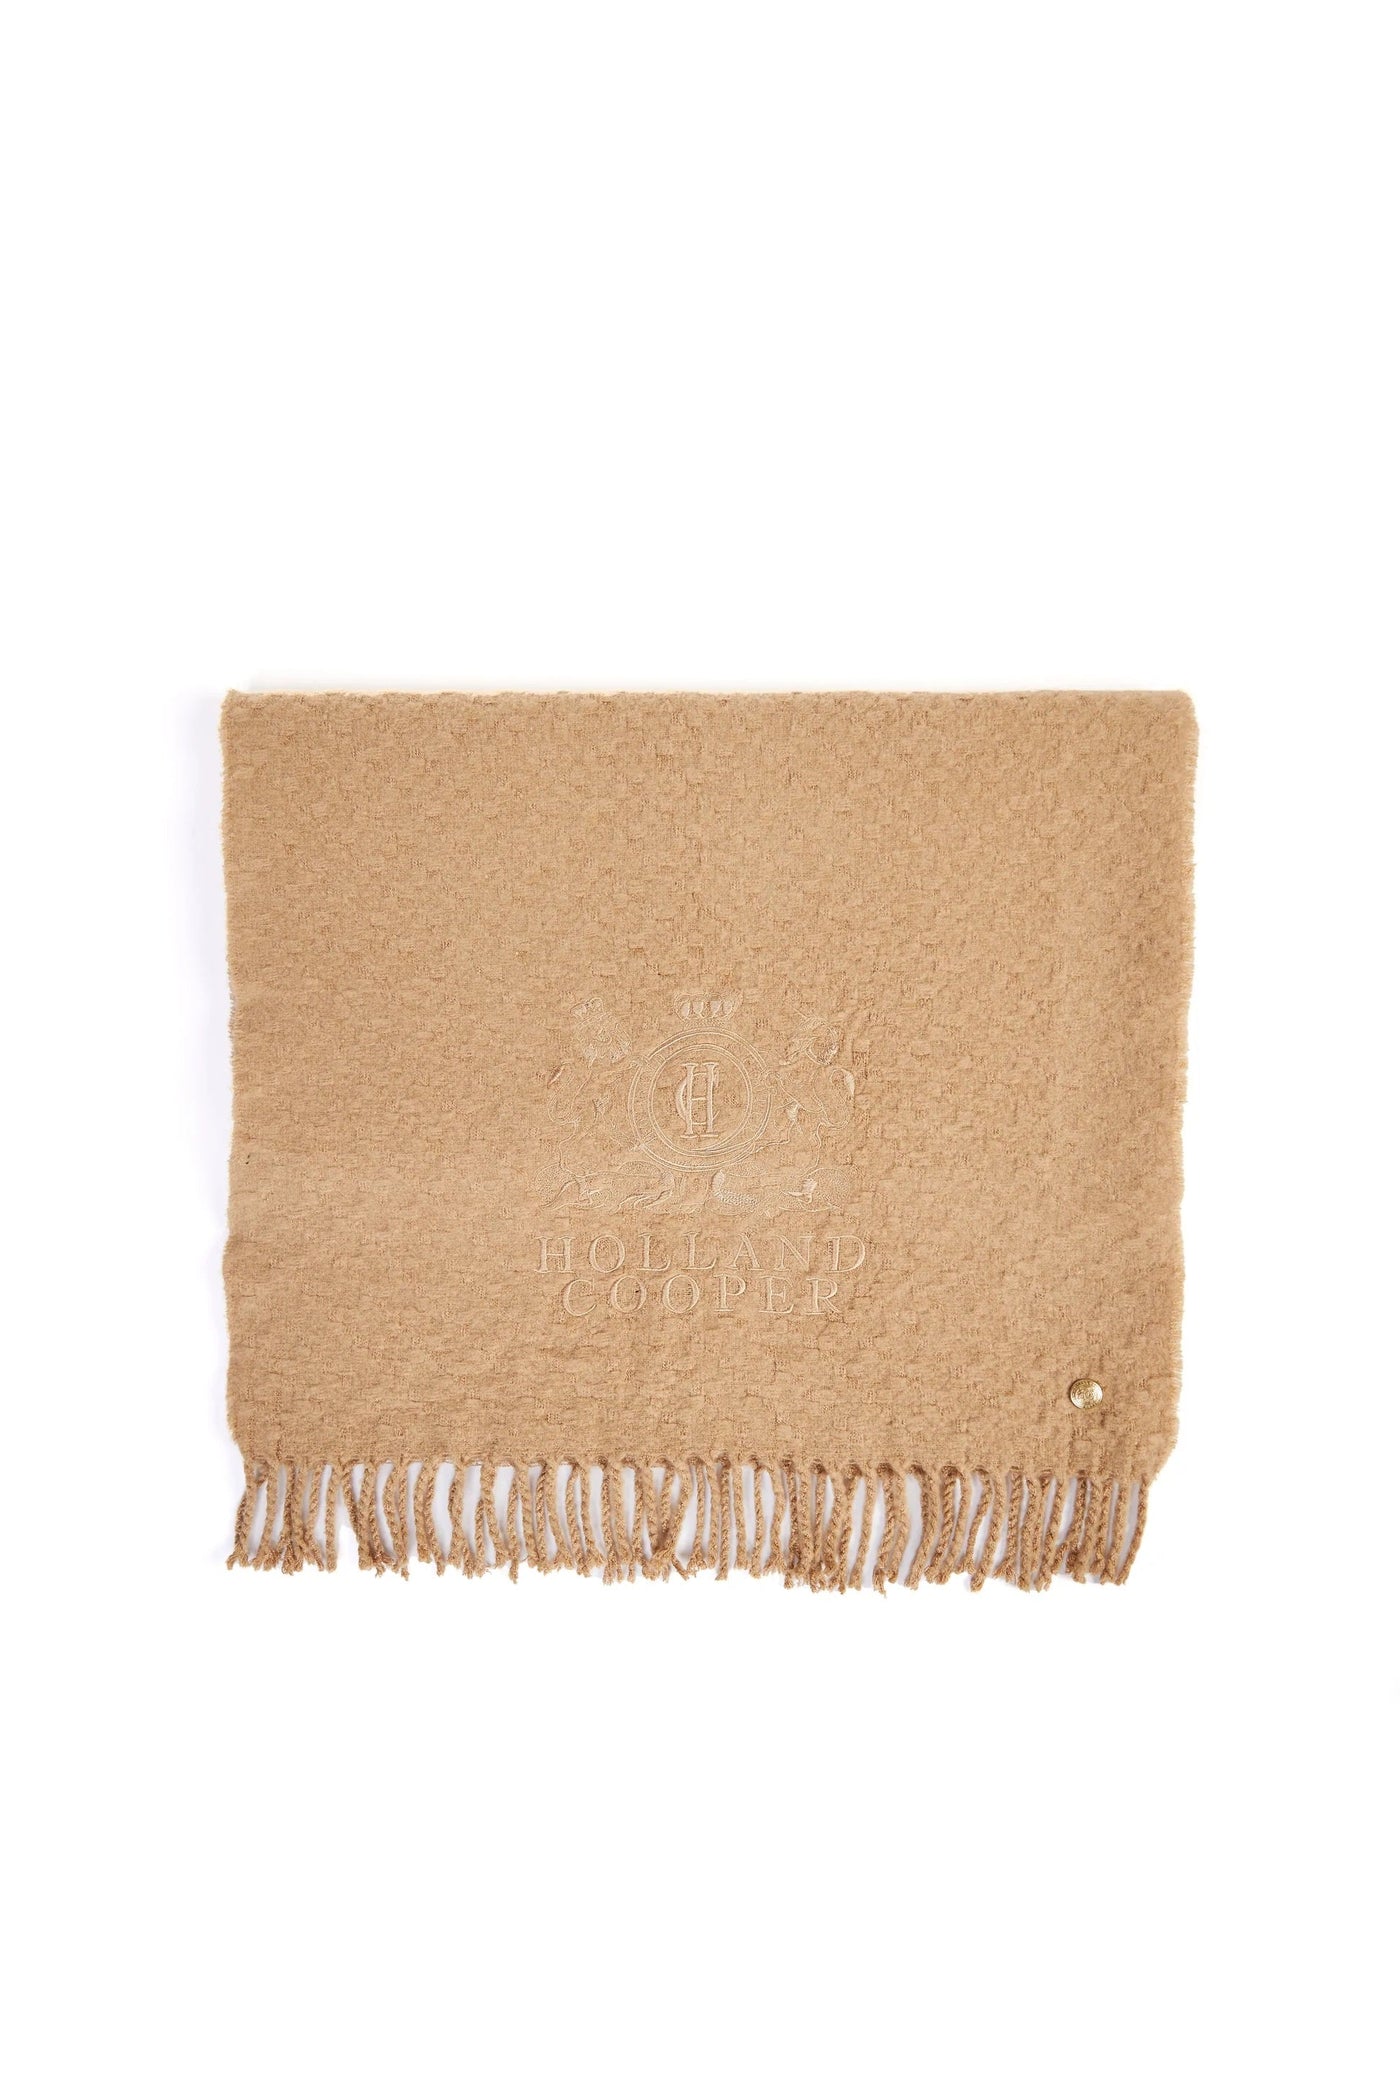 Holland Cooper Chelsea Scarf in Camel